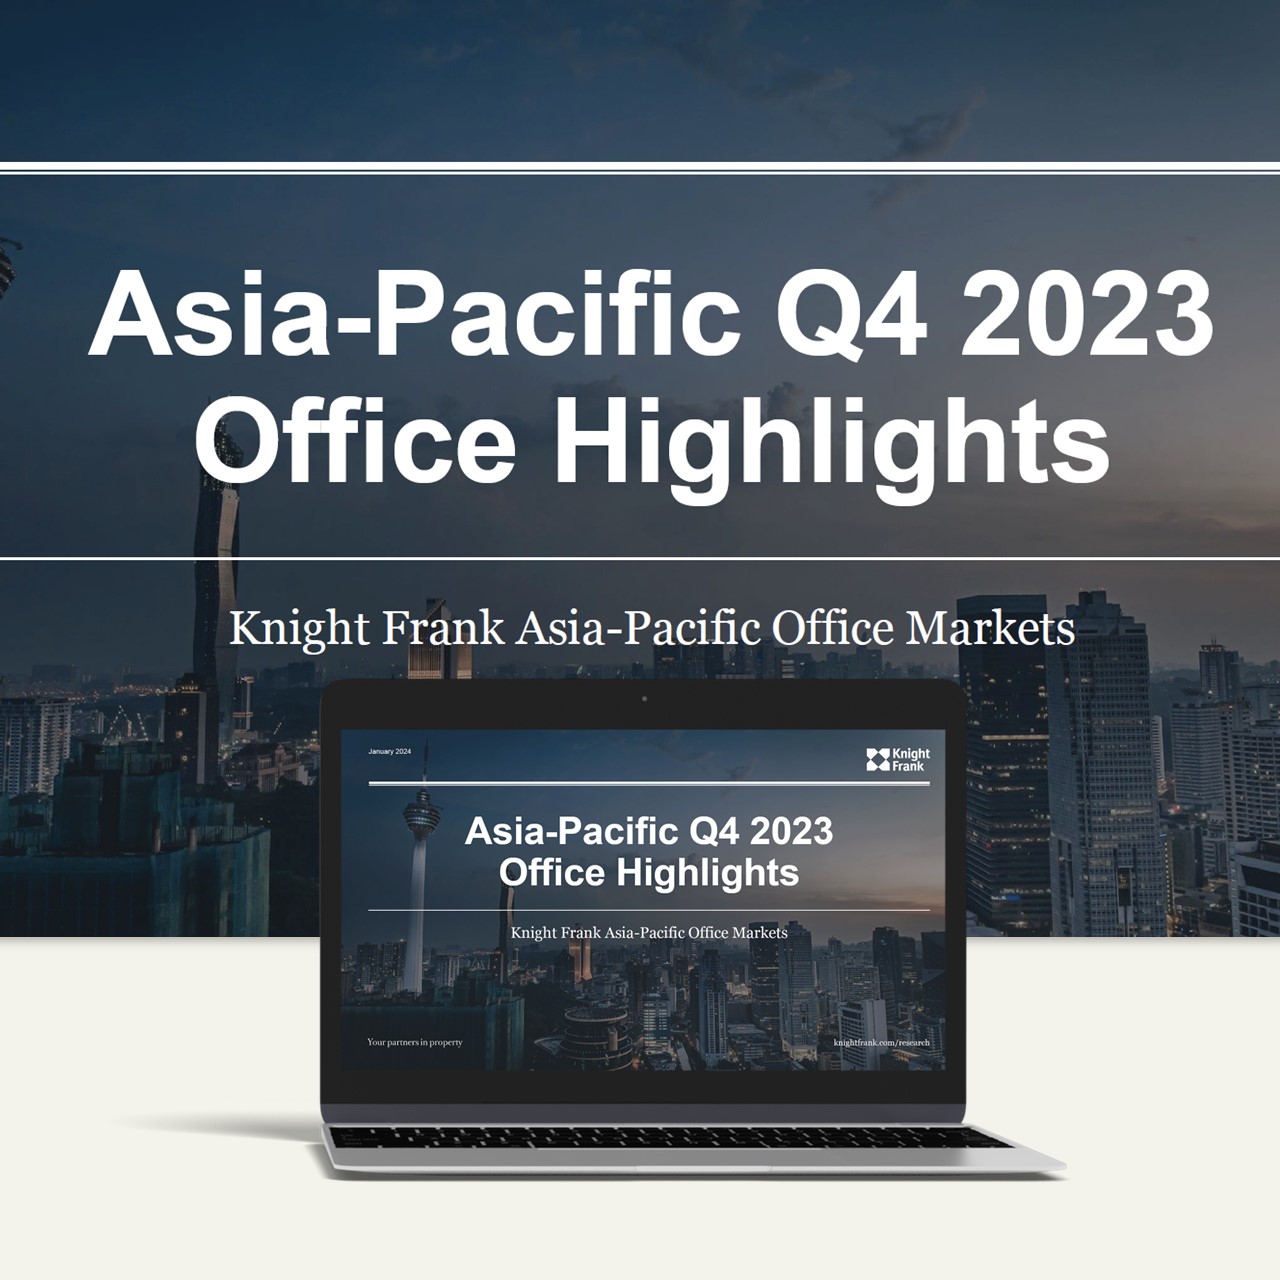 Asia-Pacific Office Highlights Q4 2023